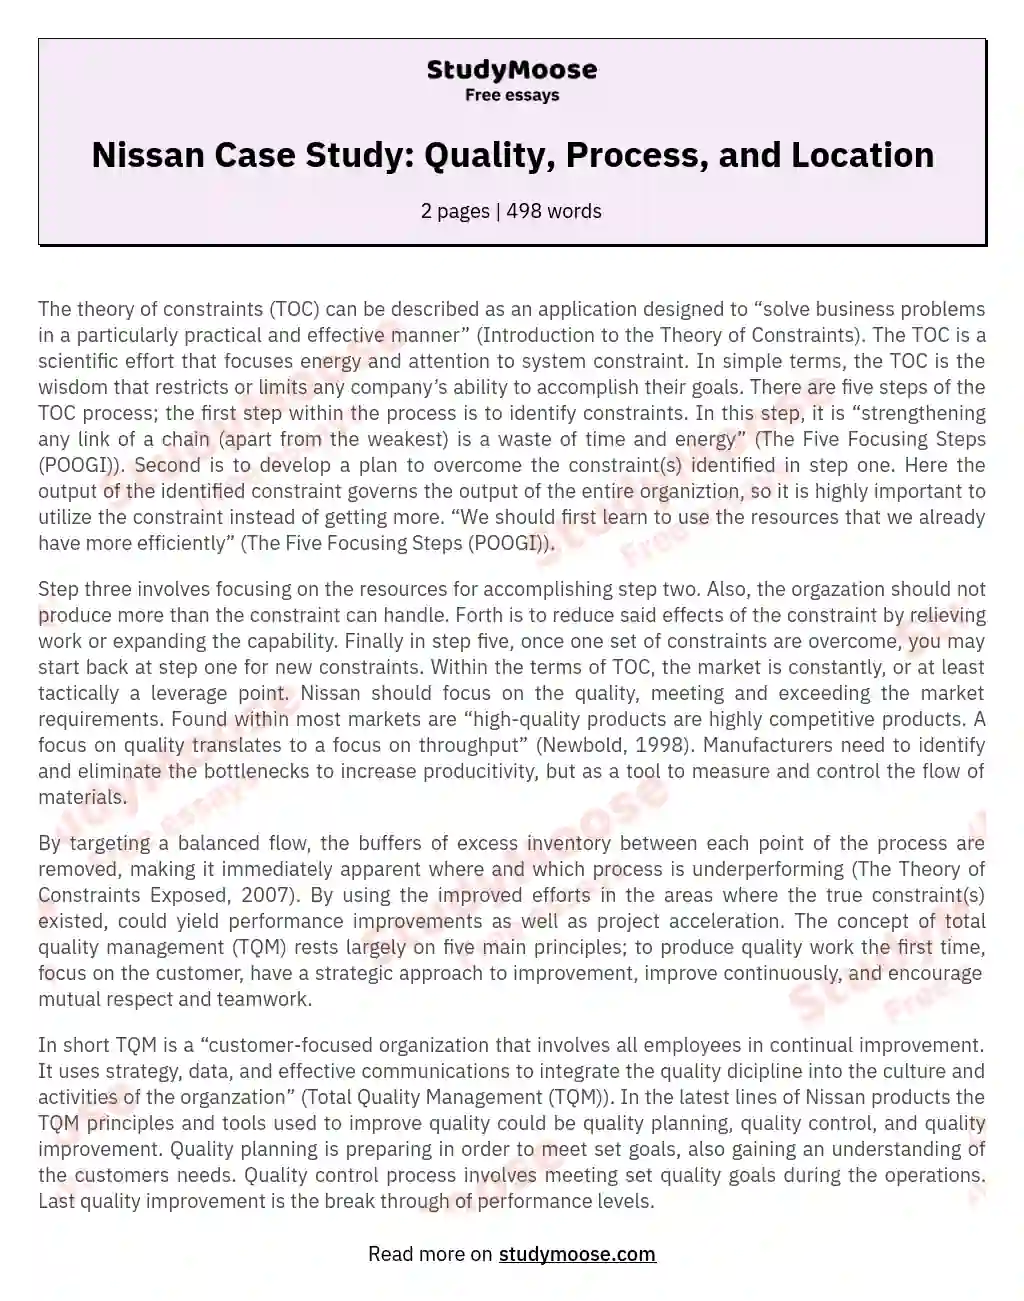 Nissan Case Study: Quality, Process, and Location